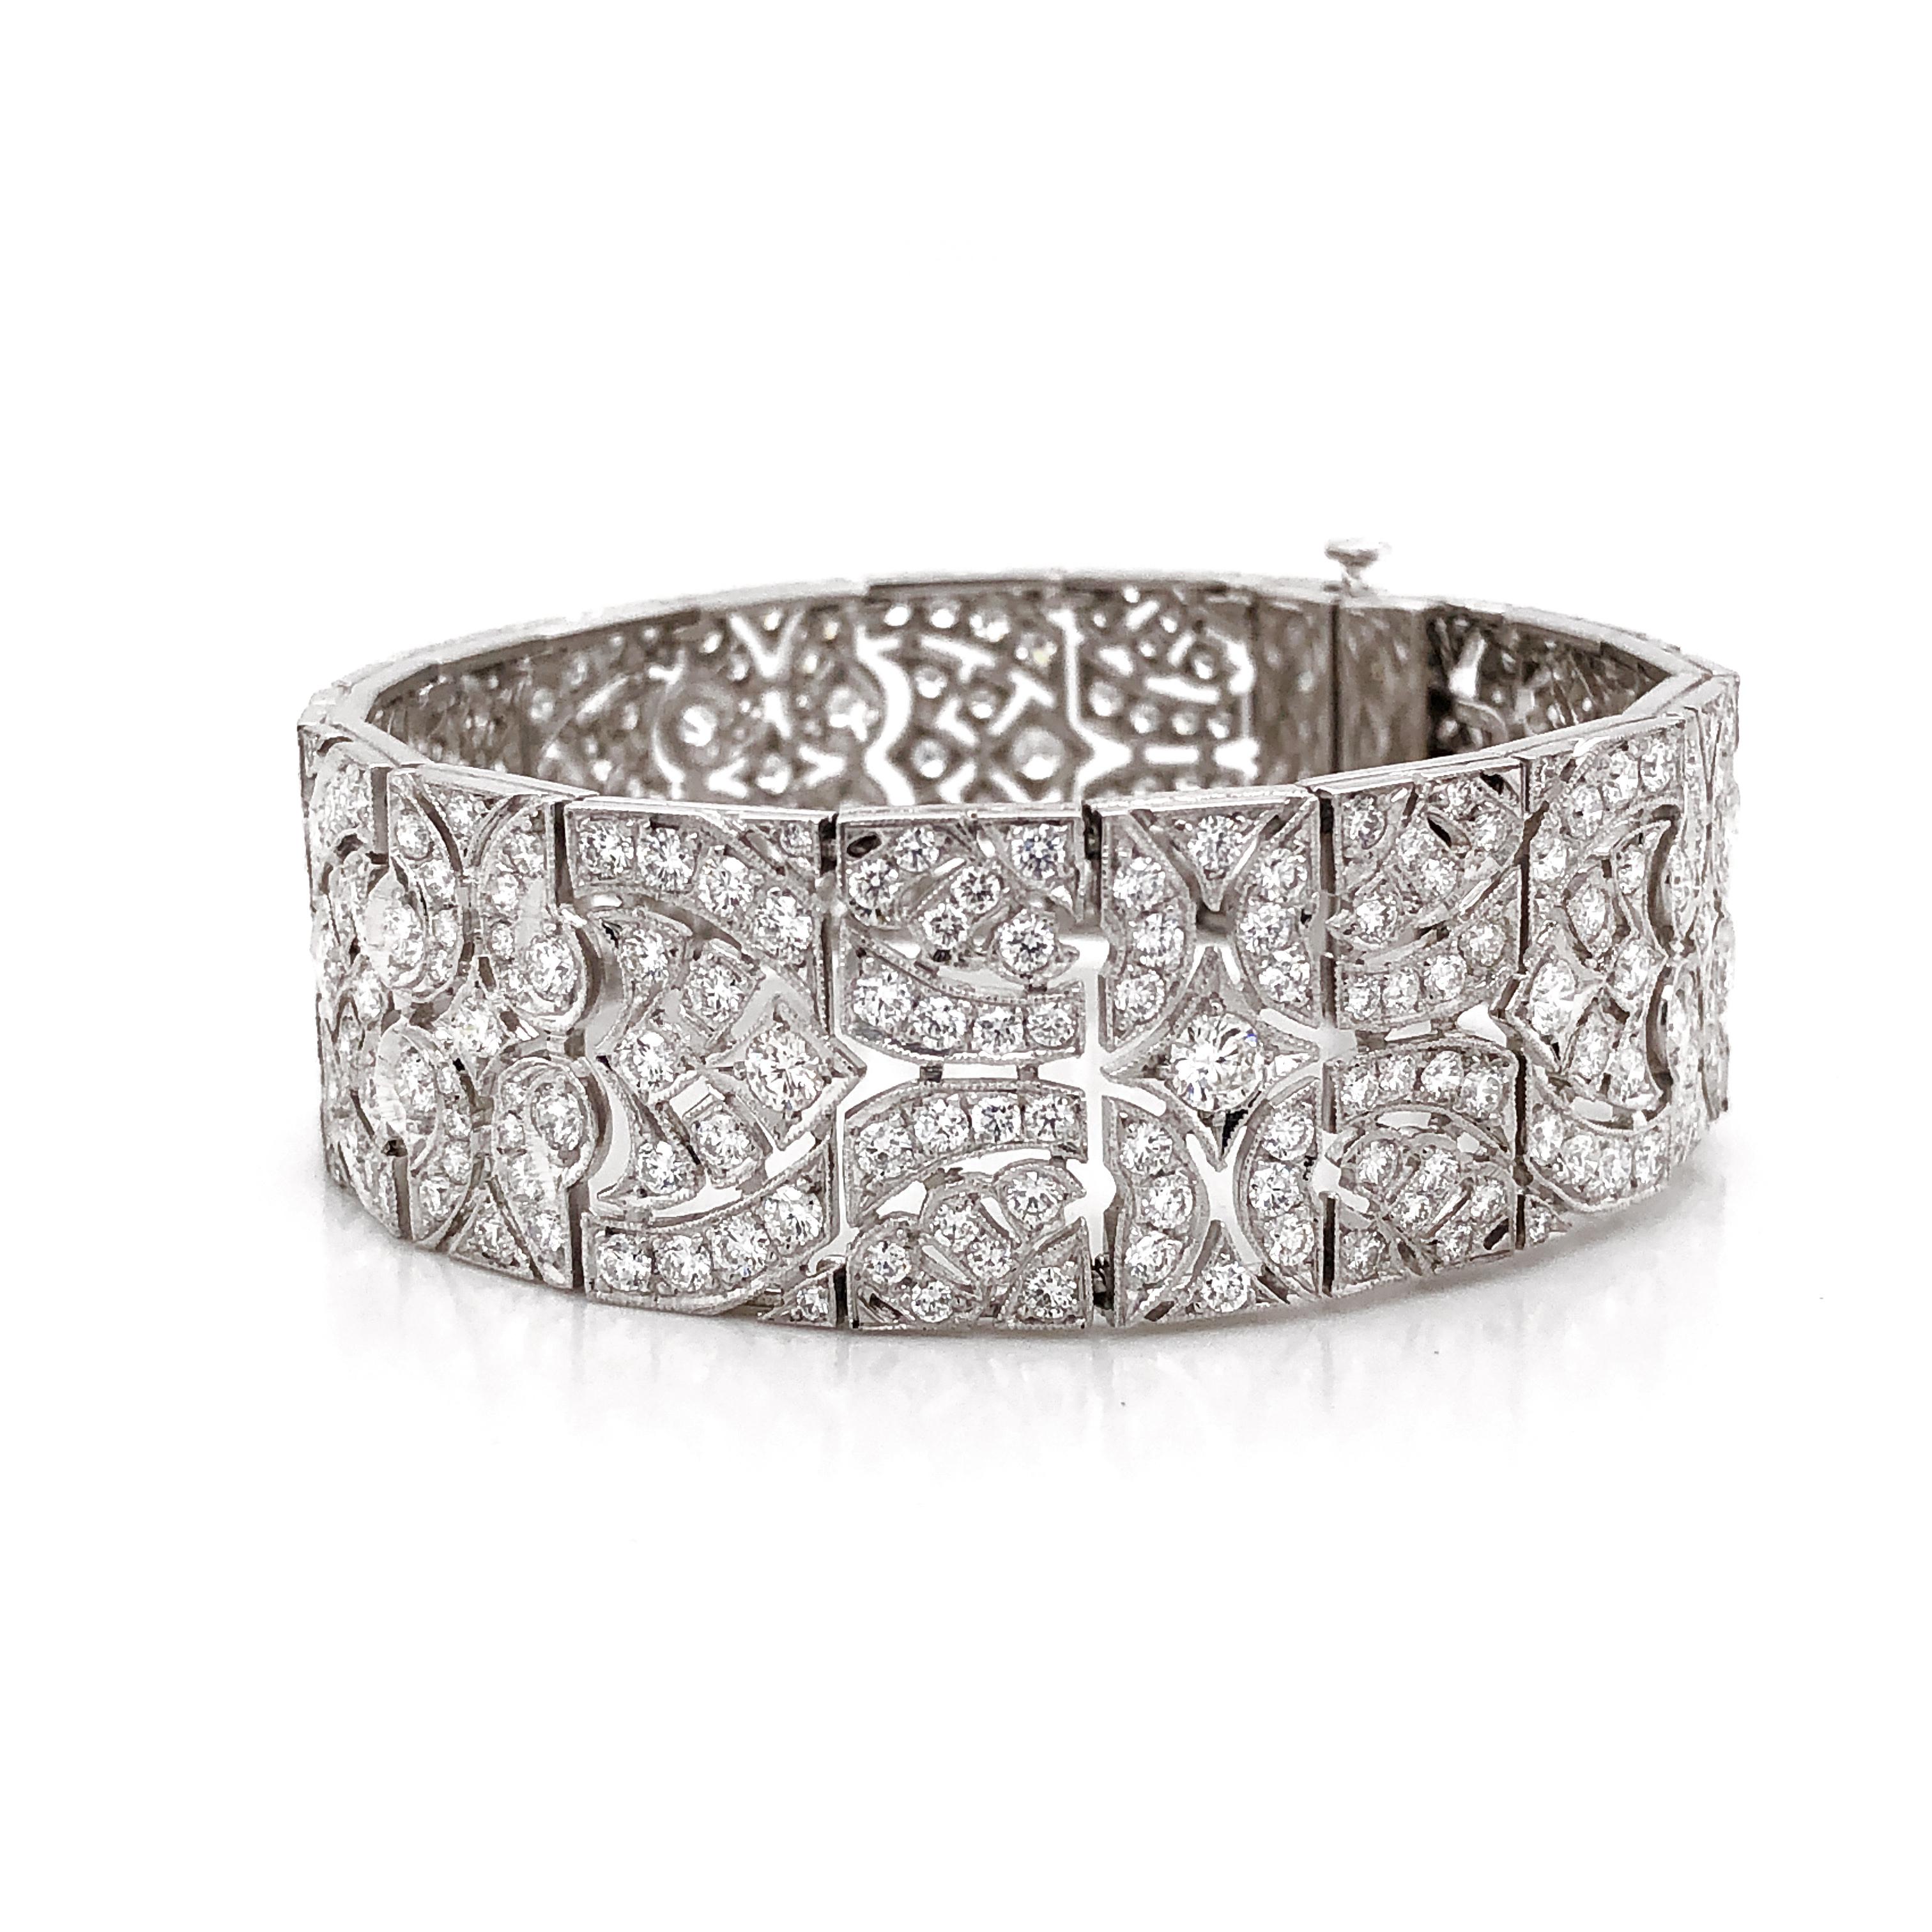 Art Deco Inspired Round Cut White Diamonds 13.8 Carat Platinum Link Bracelet In New Condition For Sale In New York, NY